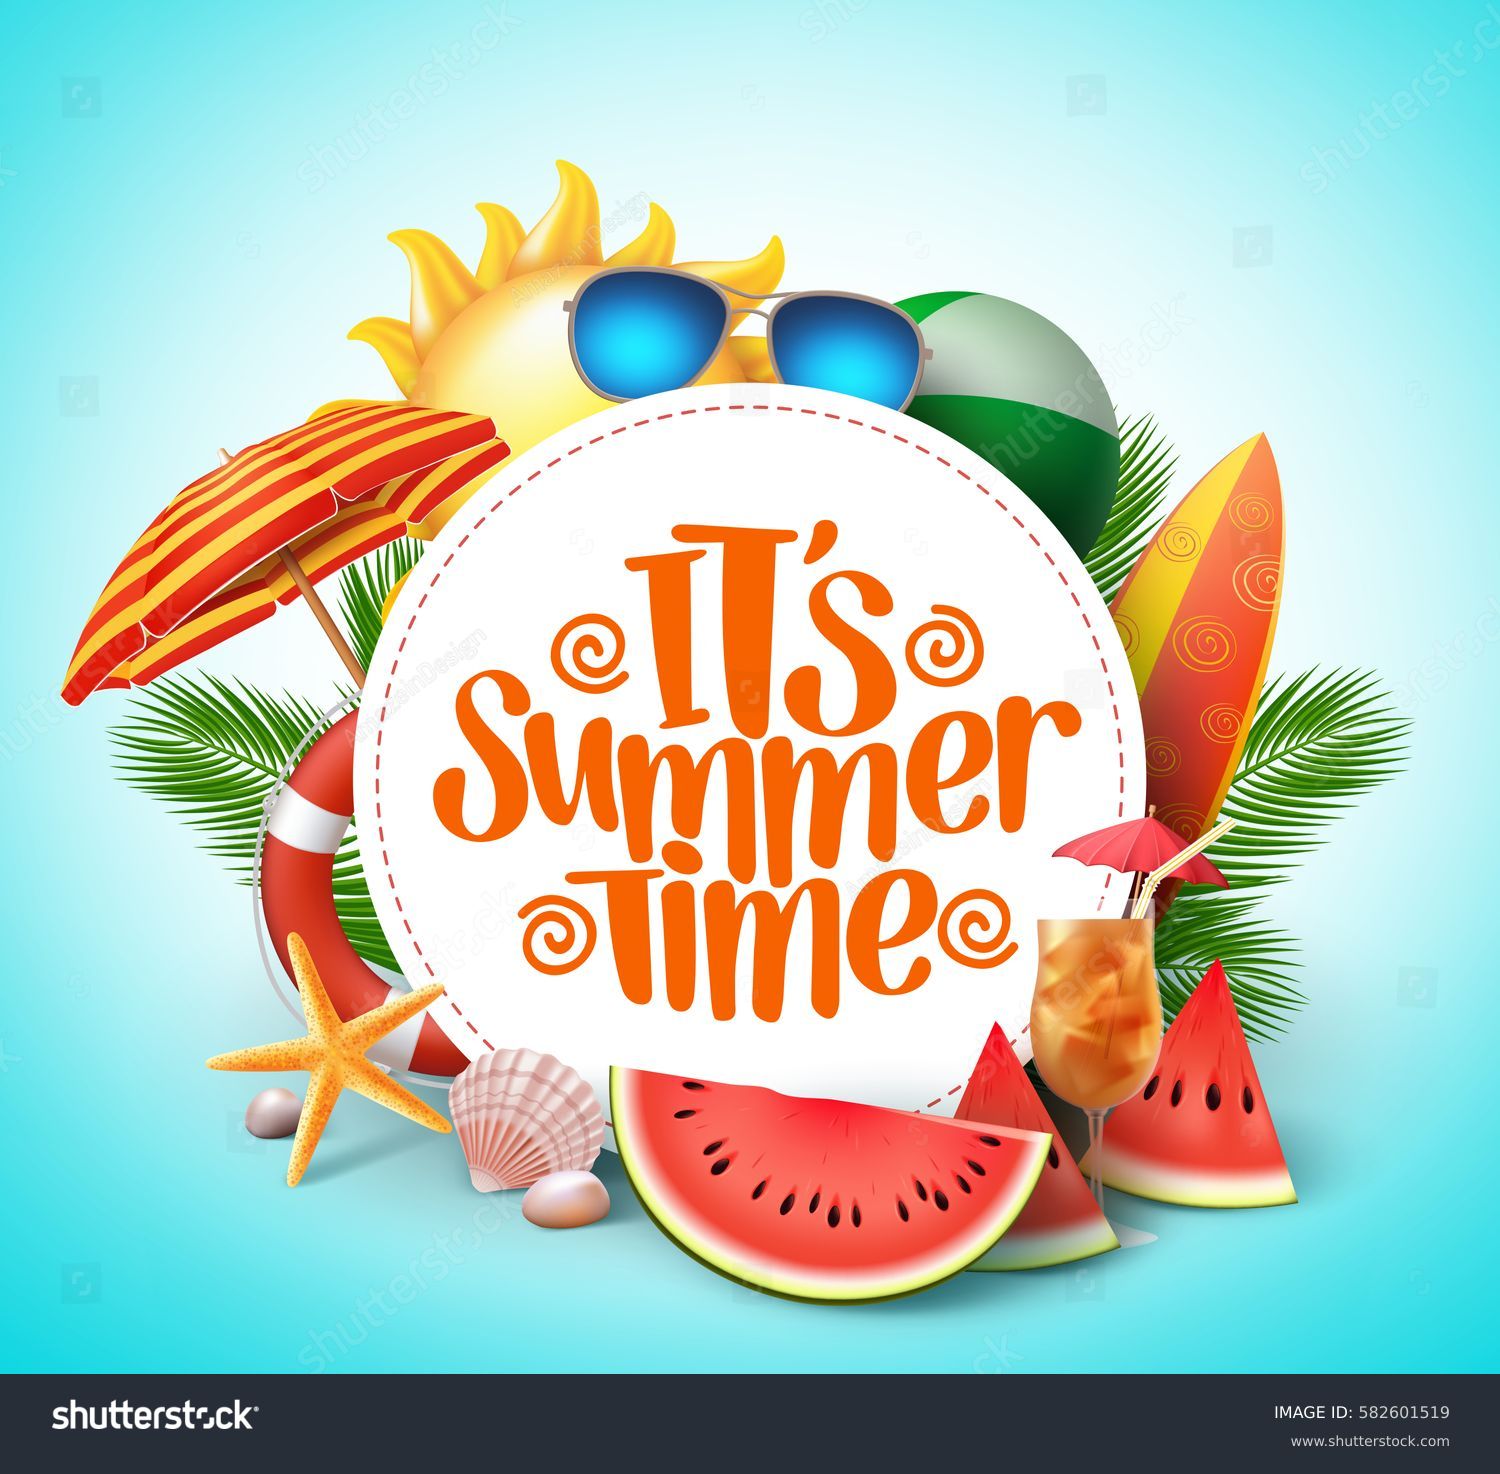 Summer time vector banner design with white circle for text and colorful beach elements in white background. Vector illustration.
 #582601519